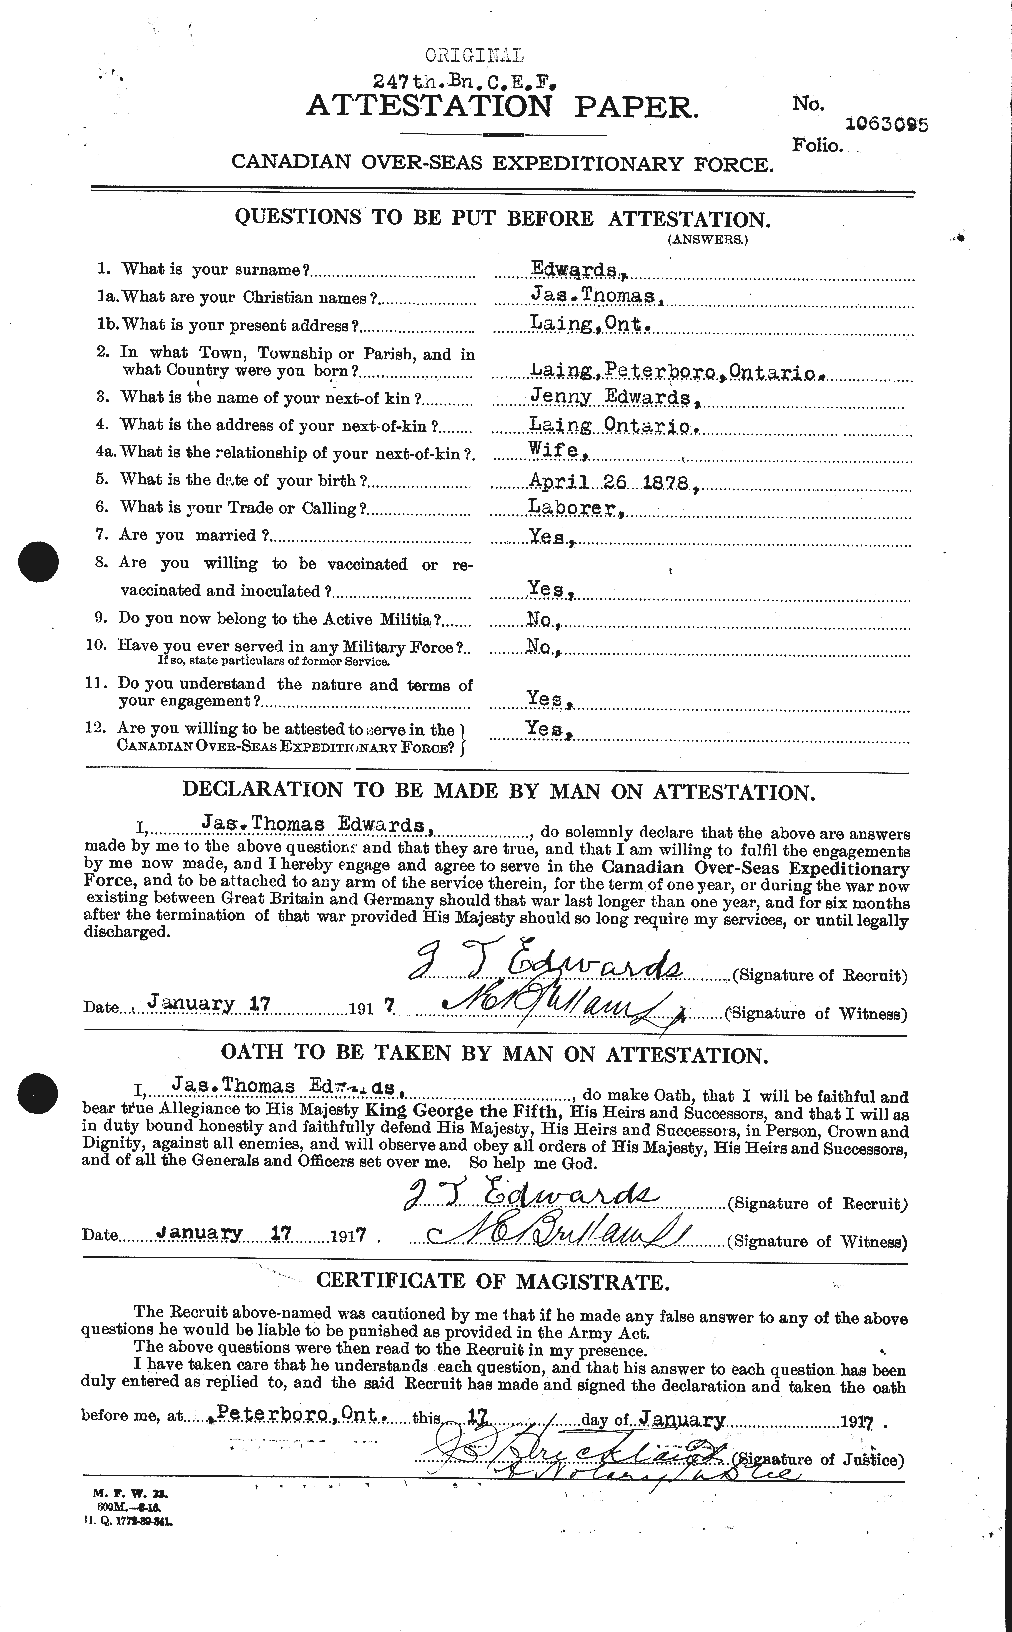 Personnel Records of the First World War - CEF 309823a